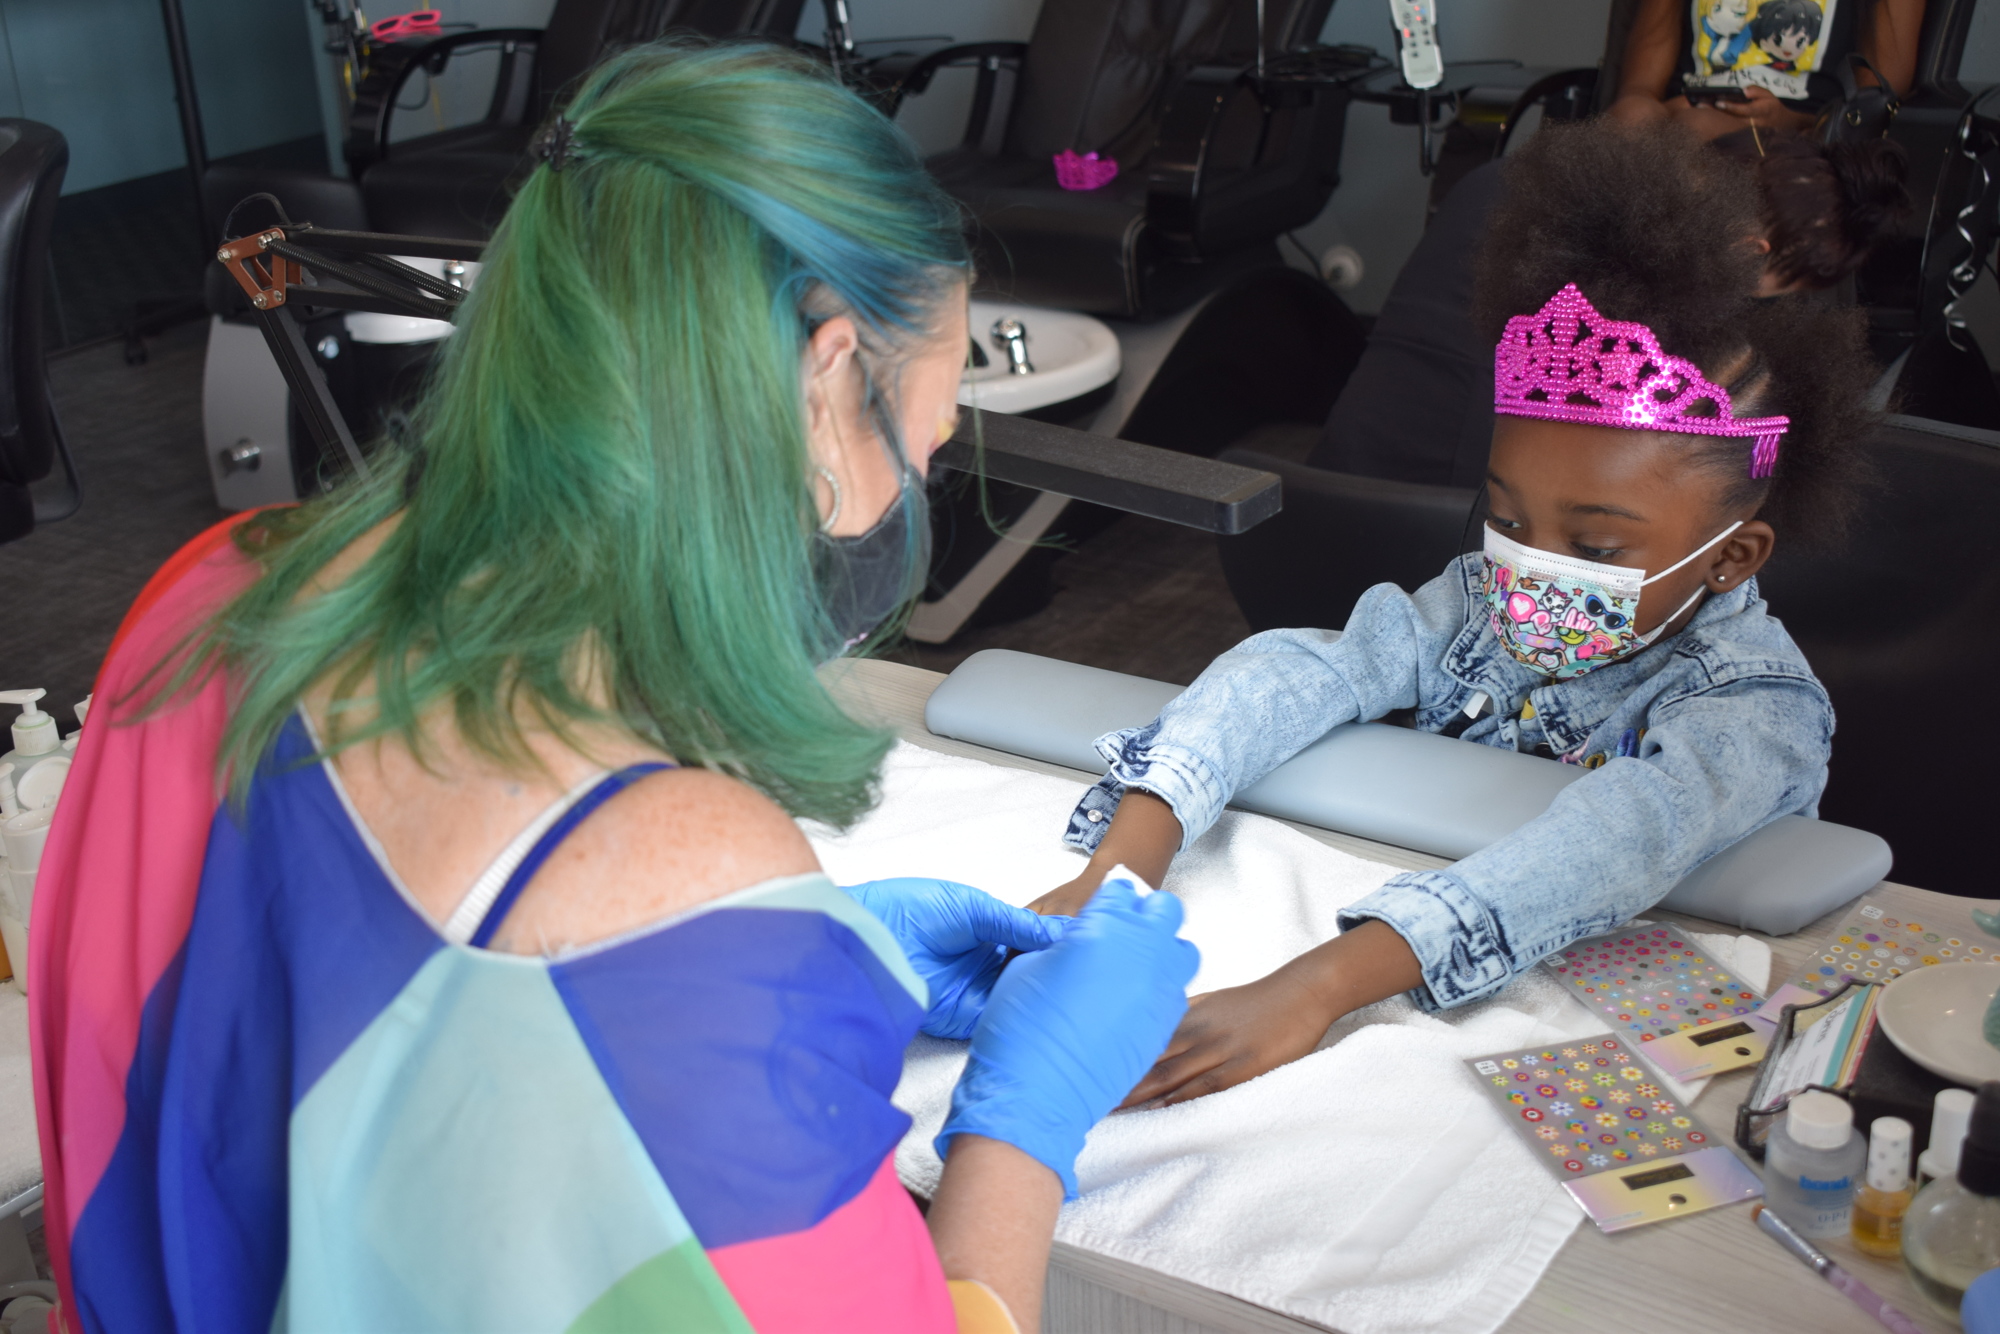 Kimberly Weller of Sirius Day Spa pampers 5-year-old Callie Johnson by doing her nails during a visit by the Sunshine Kids.